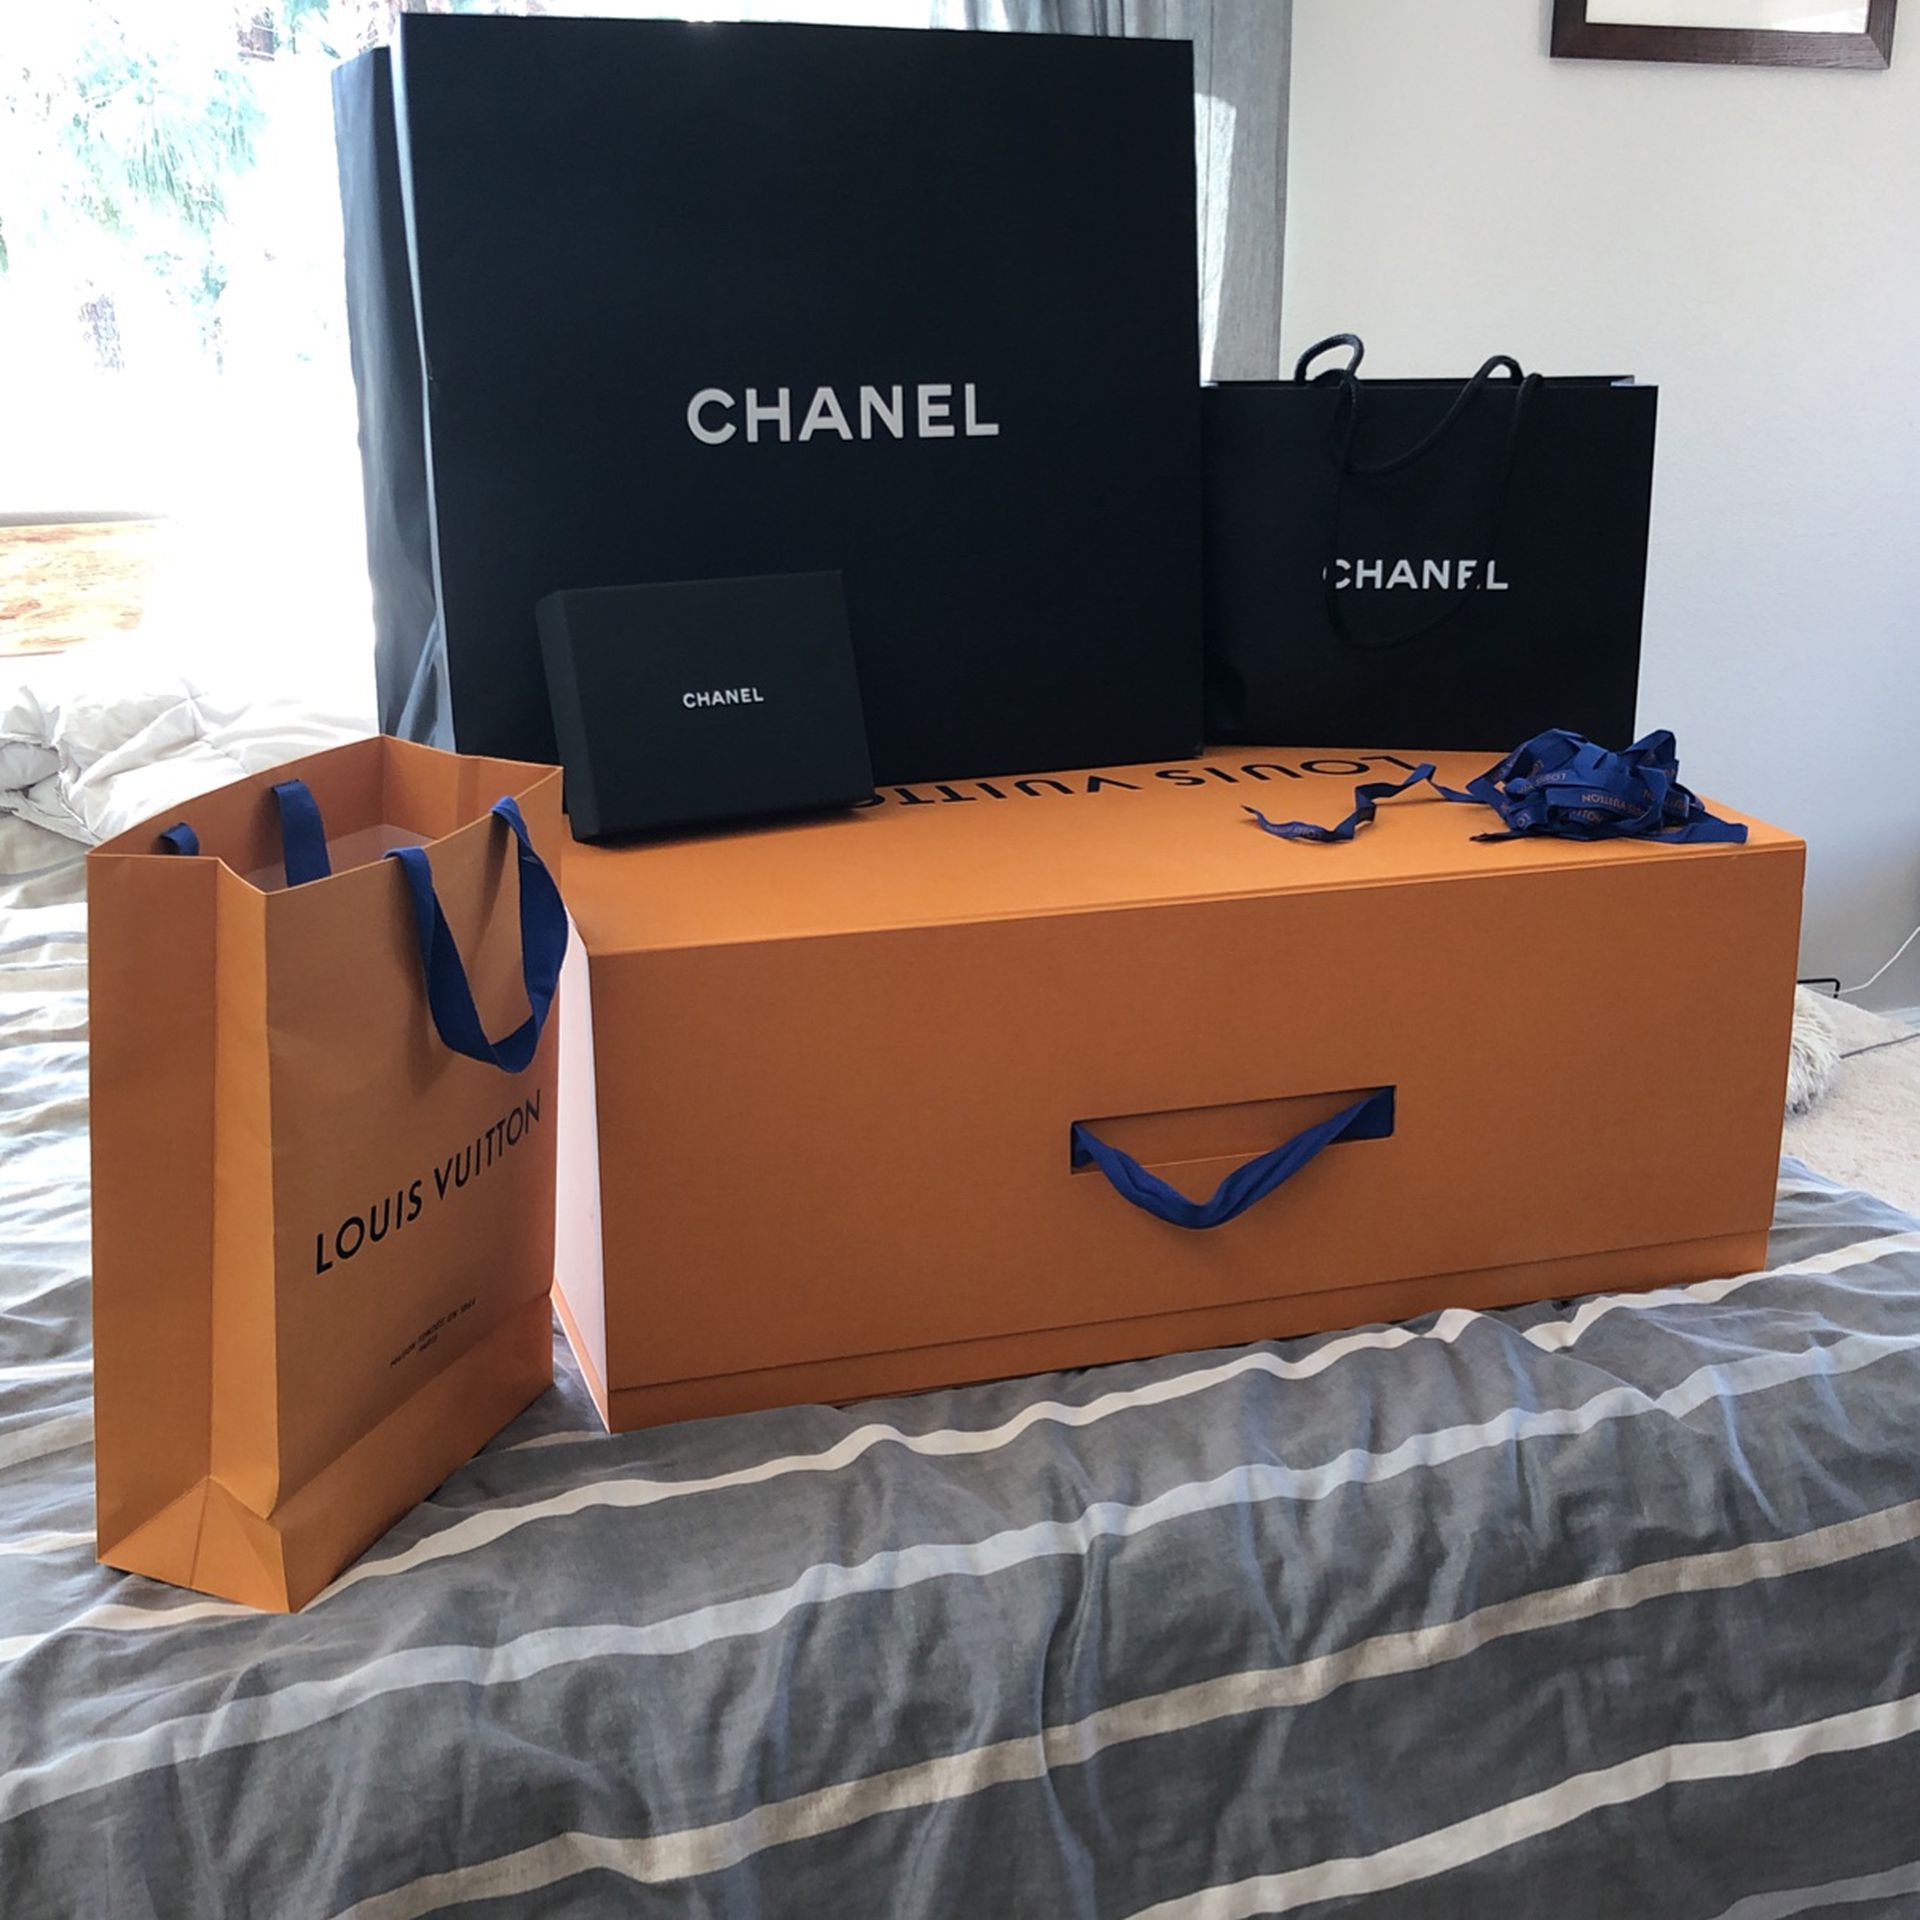 Louis vuitton and chanel mix of boxes (see account for Dimensions) for Sale  in Laguna Niguel, CA - OfferUp